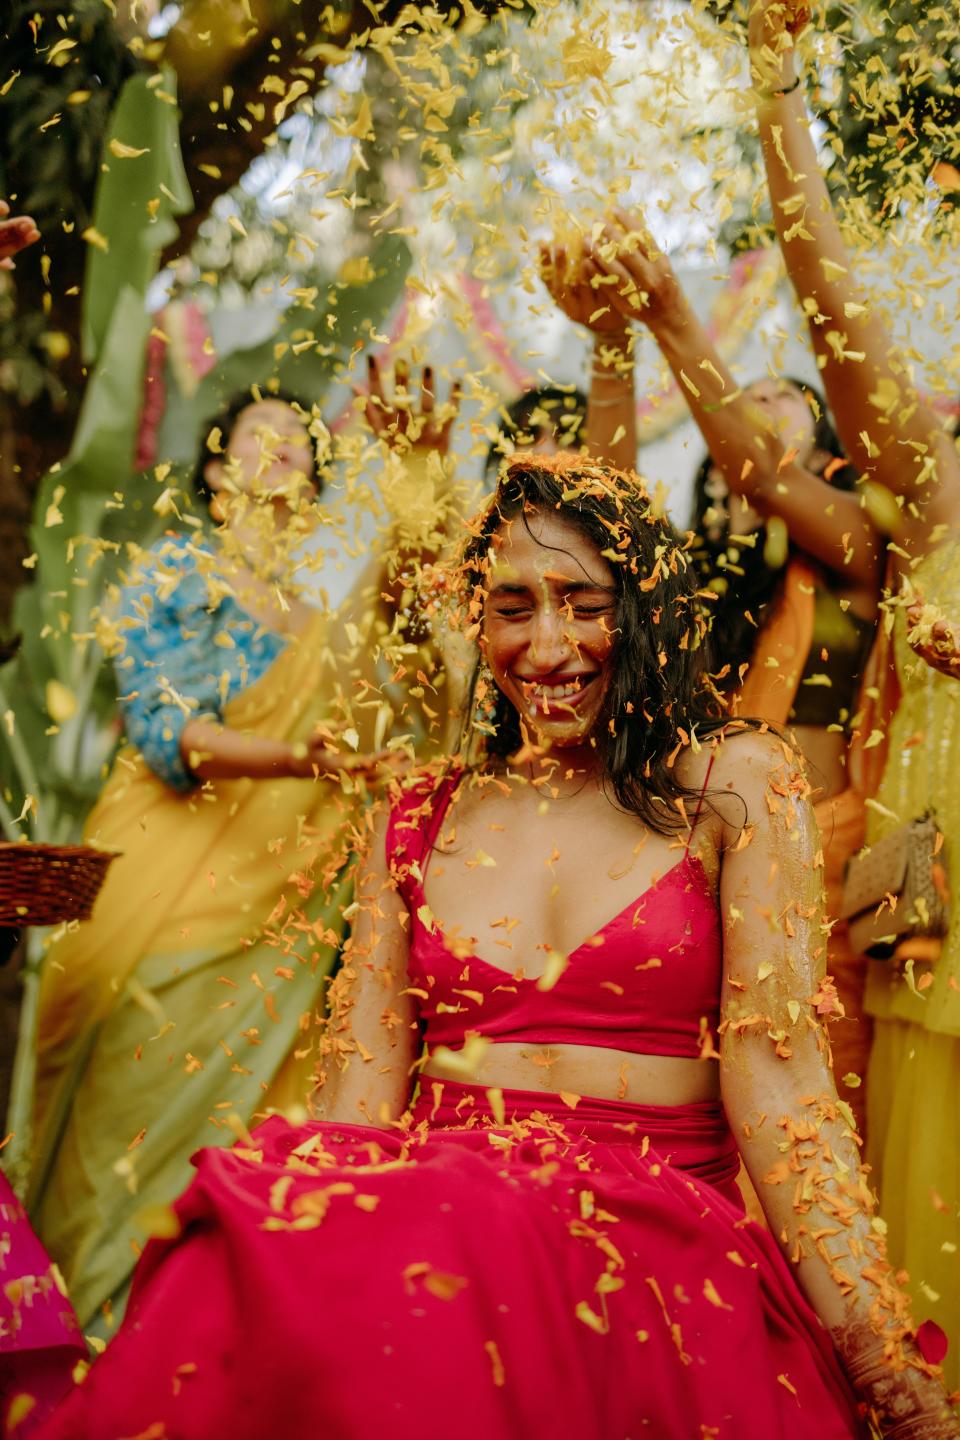 Mitali was showered with flower petals during the haldi ceremony, when the couple is typically painted with turmeric.